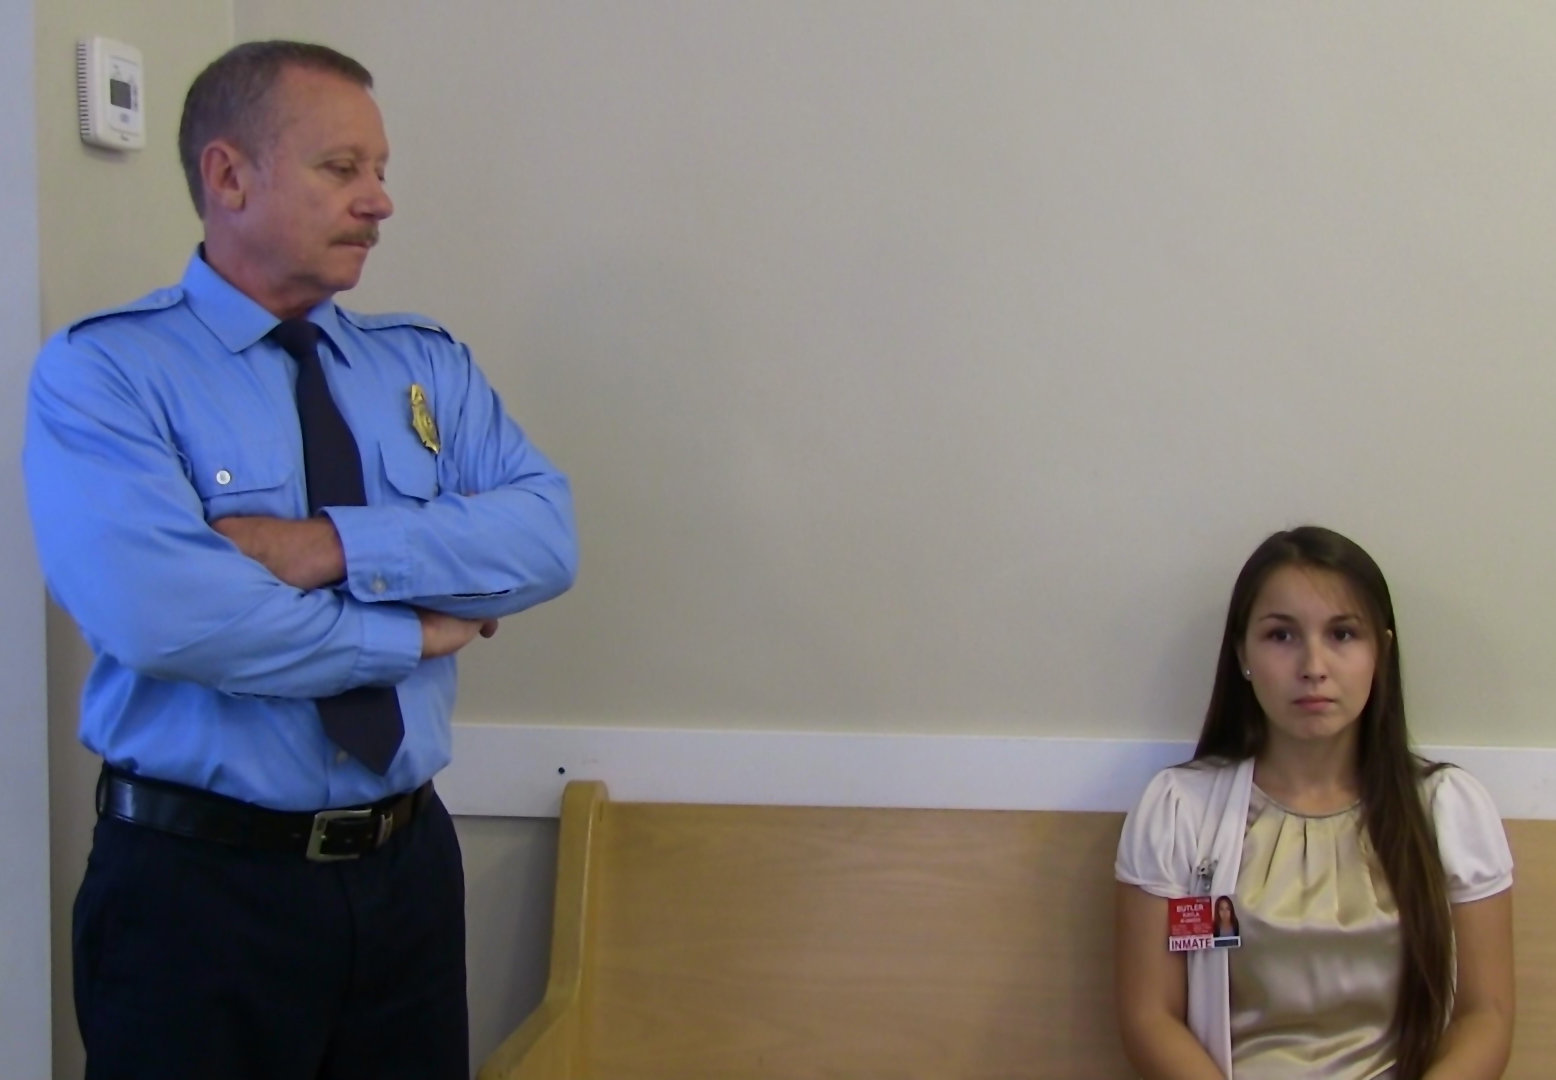 The officer (Larry Hicks) watches Kayla Butler (Jacqueline Peter) as she waits to be processed into the Lost Sheep Addiction Centre.